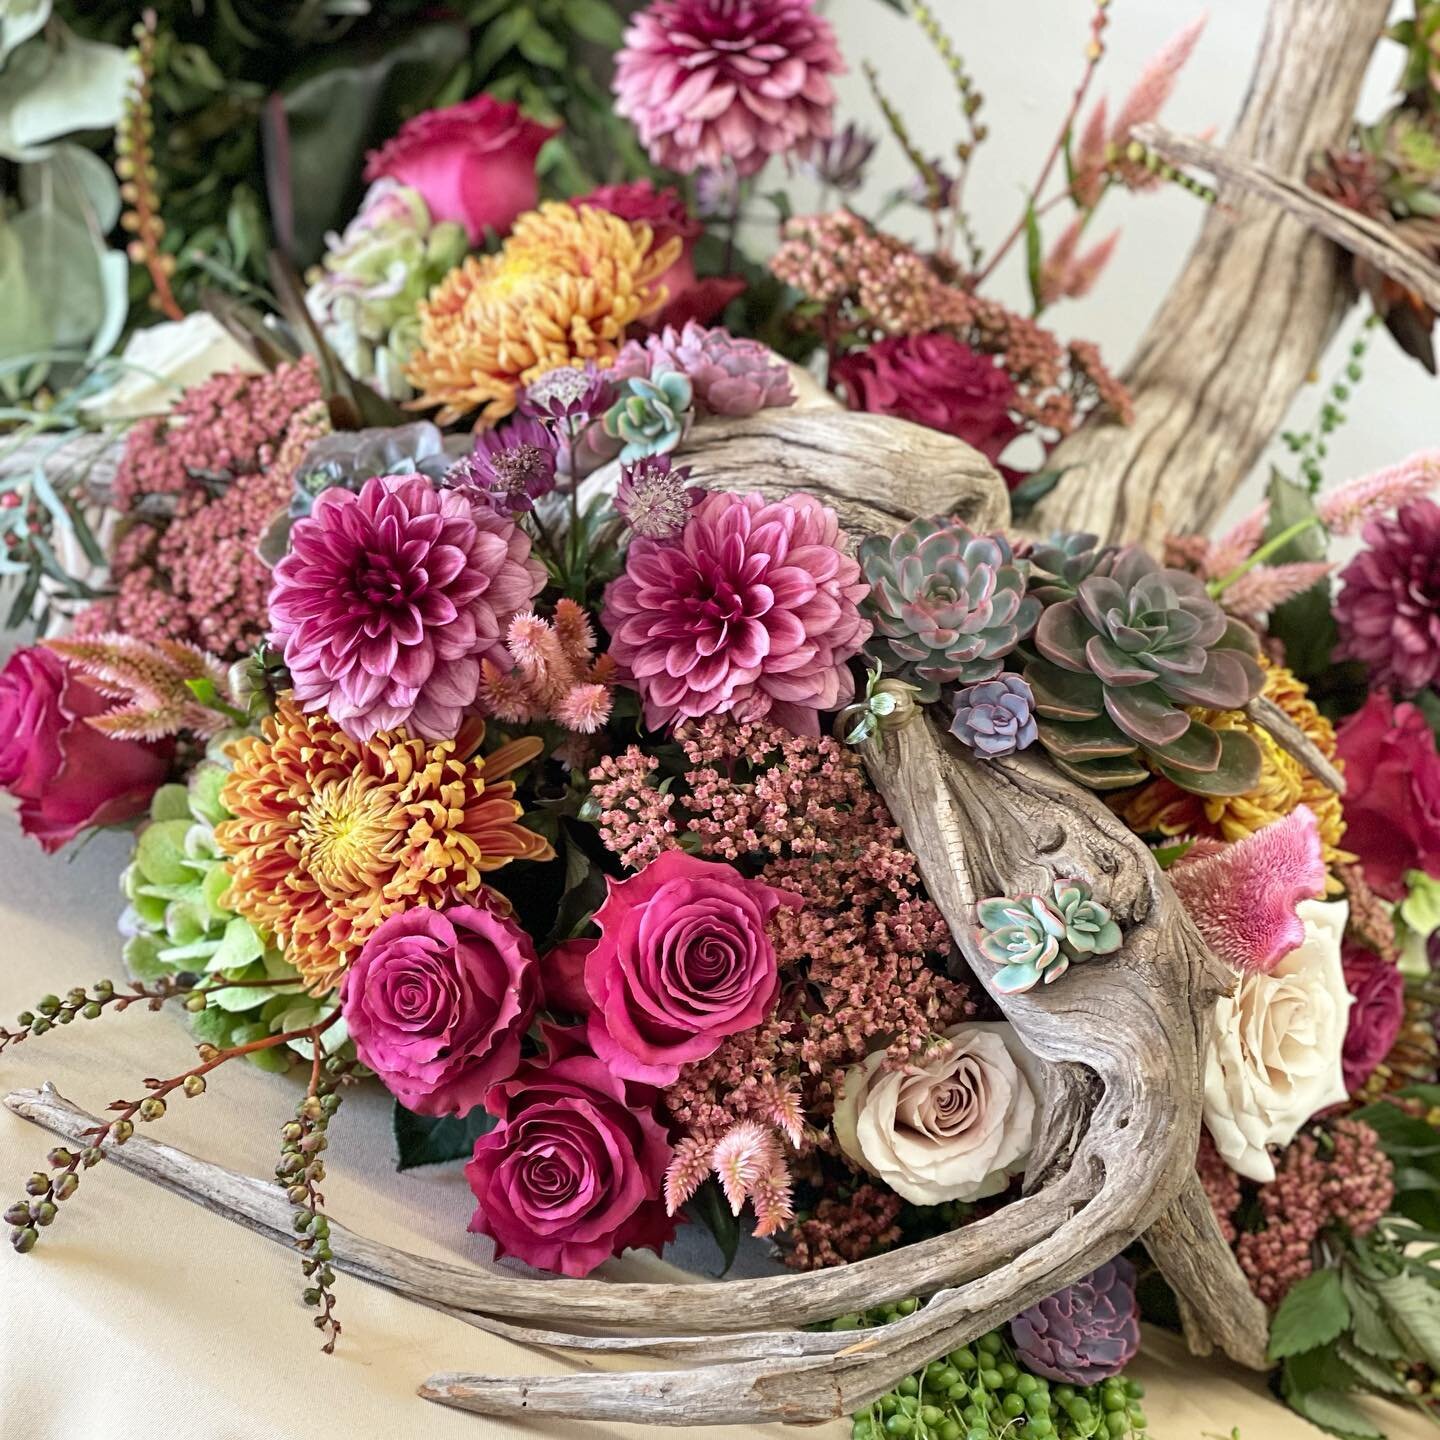 Amazing design inspiration from @aprilcollins997 for the @florasourcekansascity open house!! Flowers include disbuds in gold, beautiful purple roses, locally grown dahlias, celosia, sedum, crocosmia, pepperberry, and a selection of succulents in some